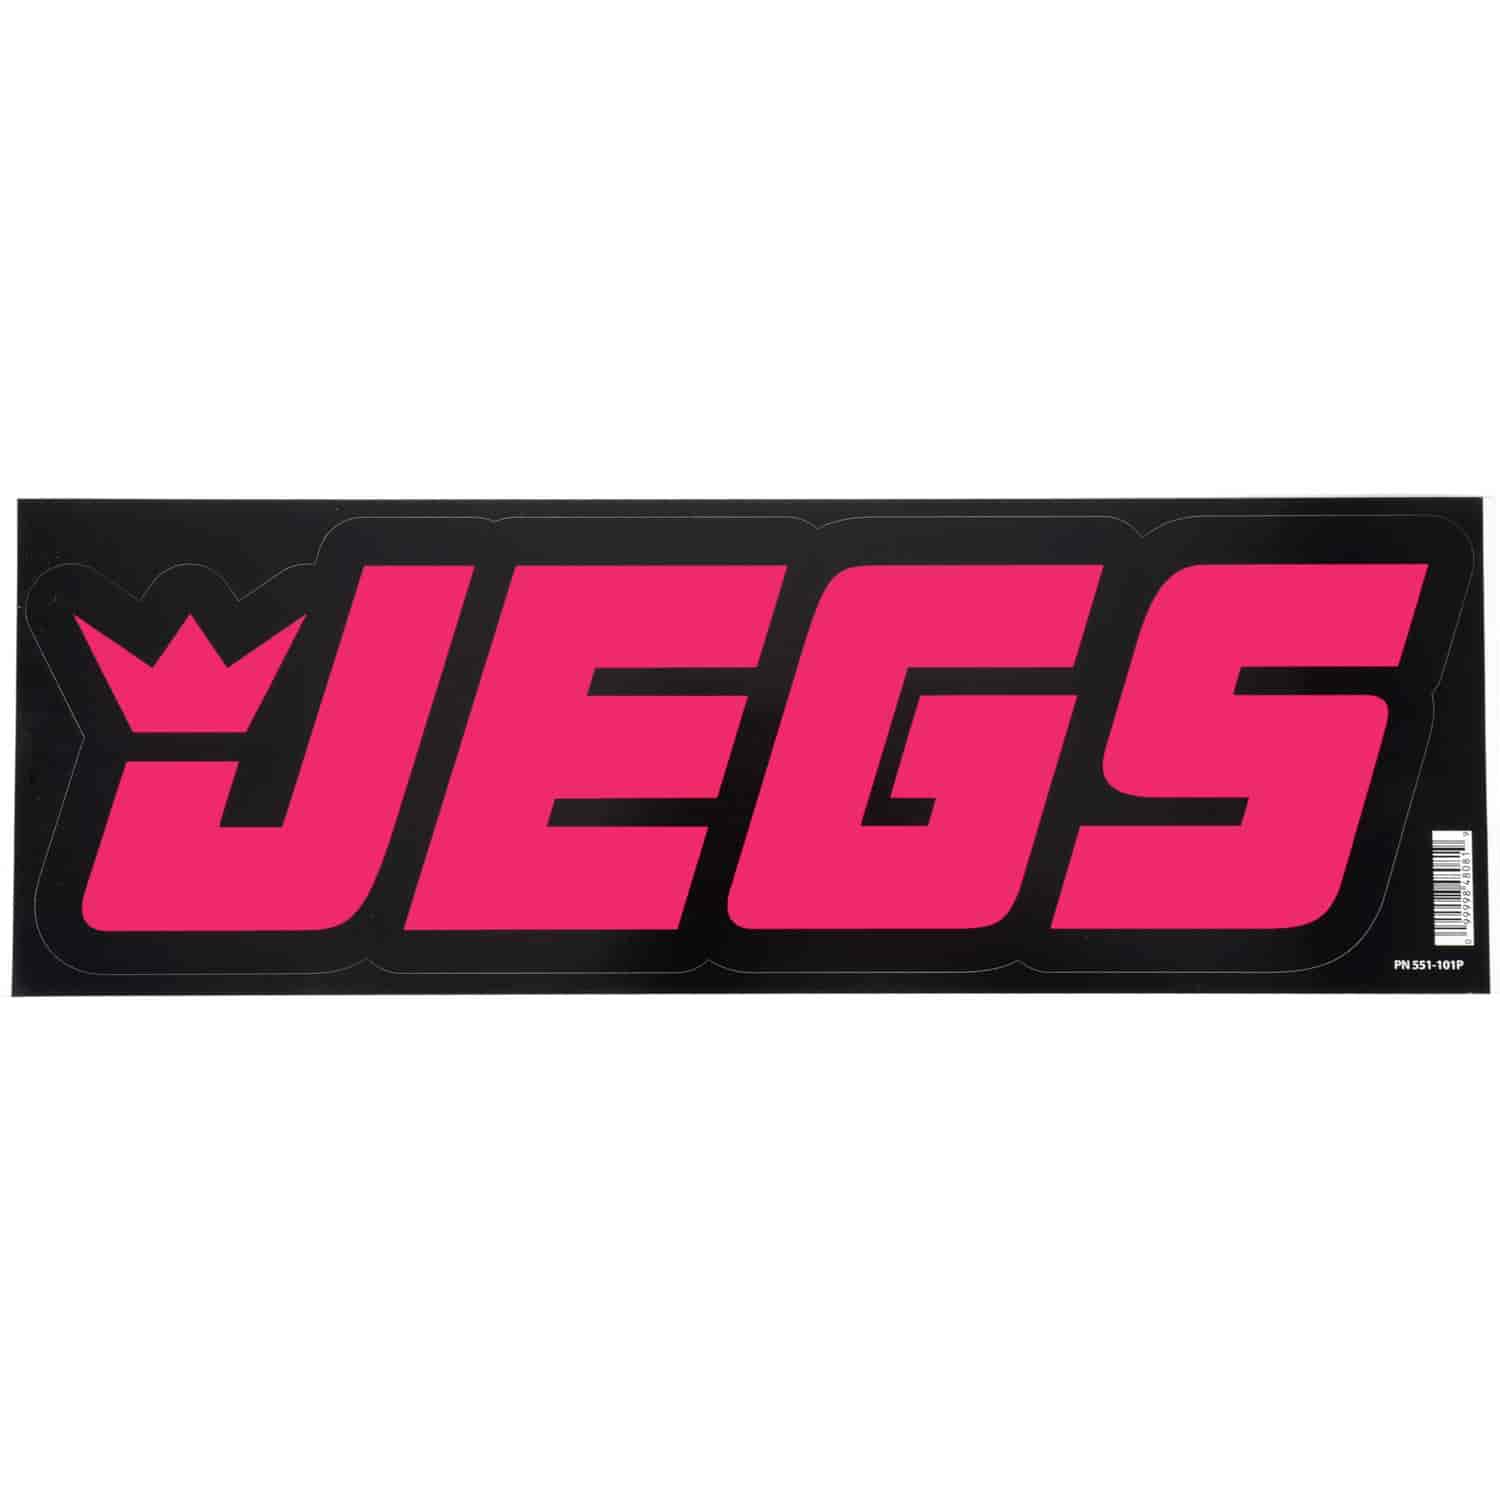 JEGS Pink Large Racing Decal [19 in. x 5 9/16 in.]